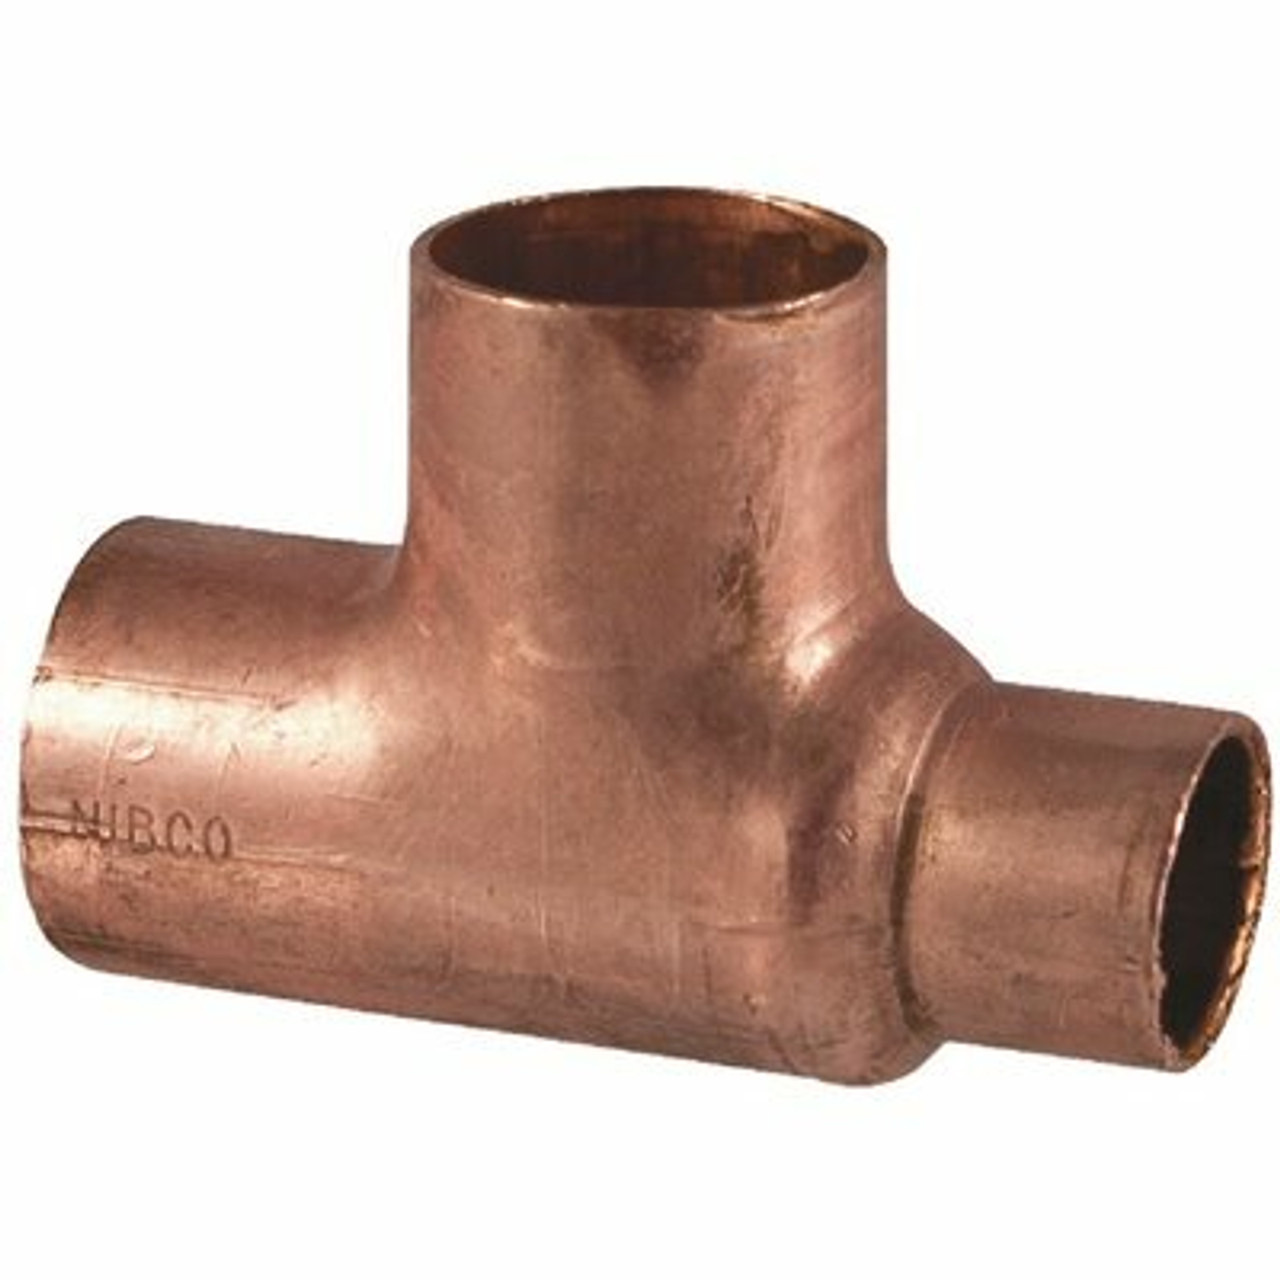 Nibco 1 In. X 3/4 In. X 1 In. Copper Pressure All X Cup Tee Fitting